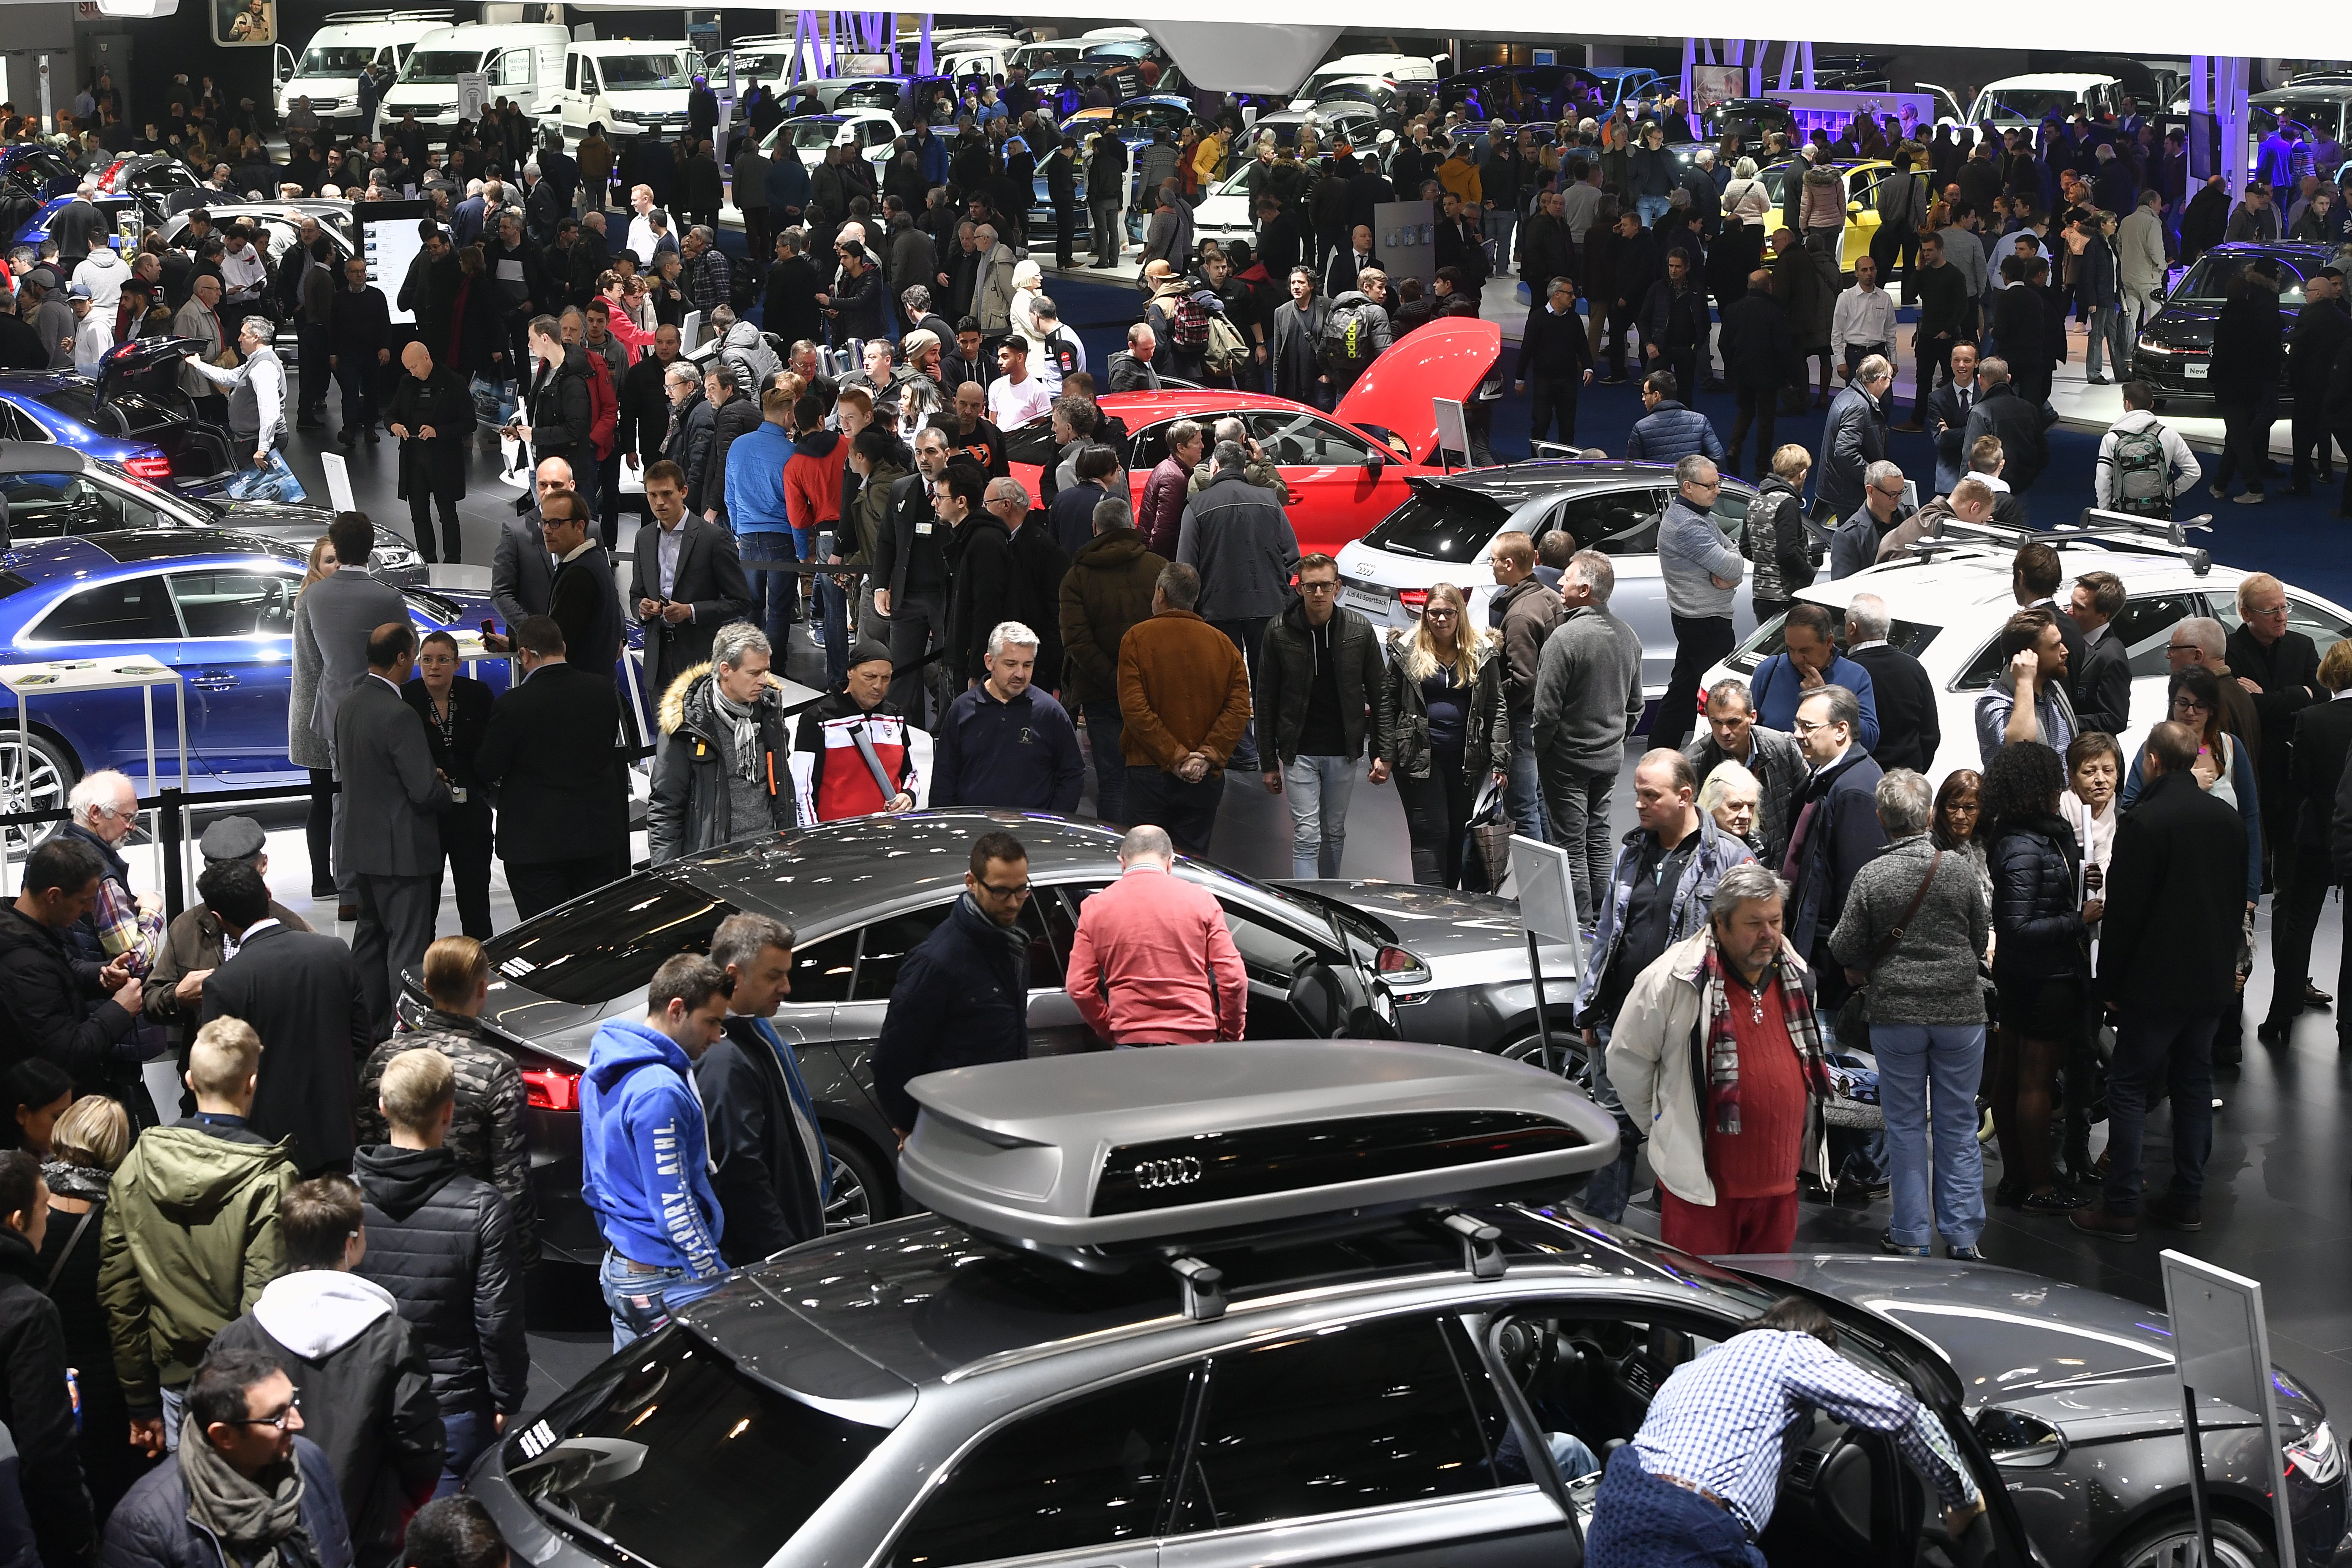 Brussels Motor Show opens up for new mobility